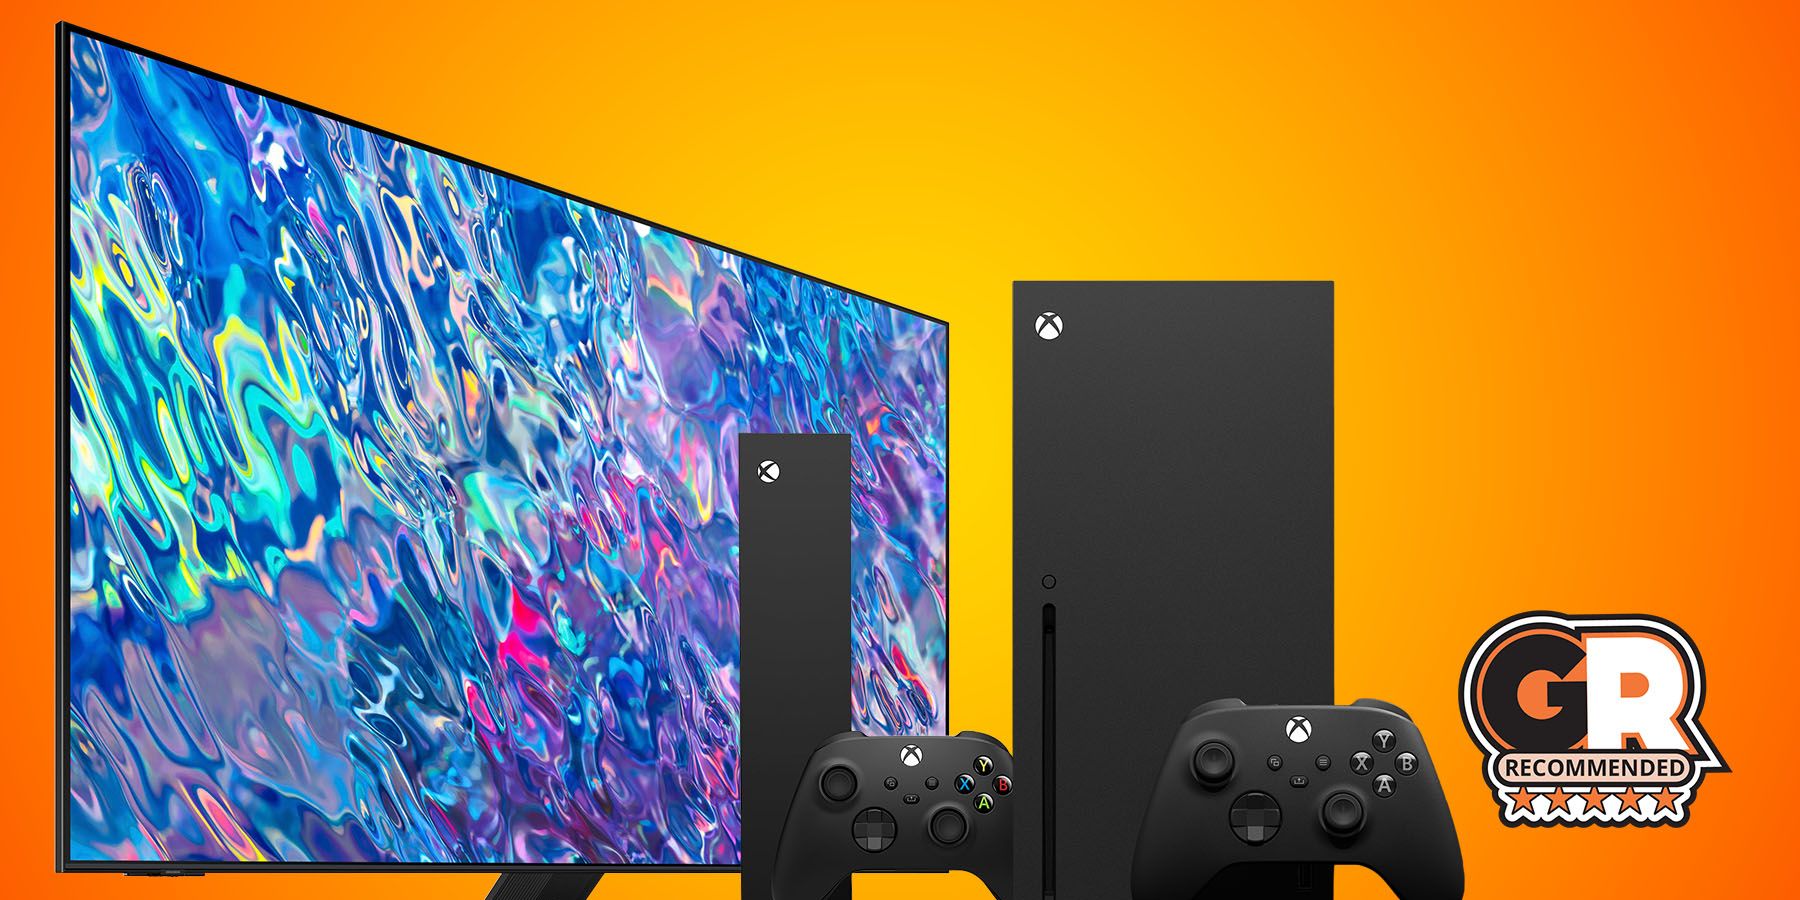 The Best TVs For Gaming on an Xbox Series X